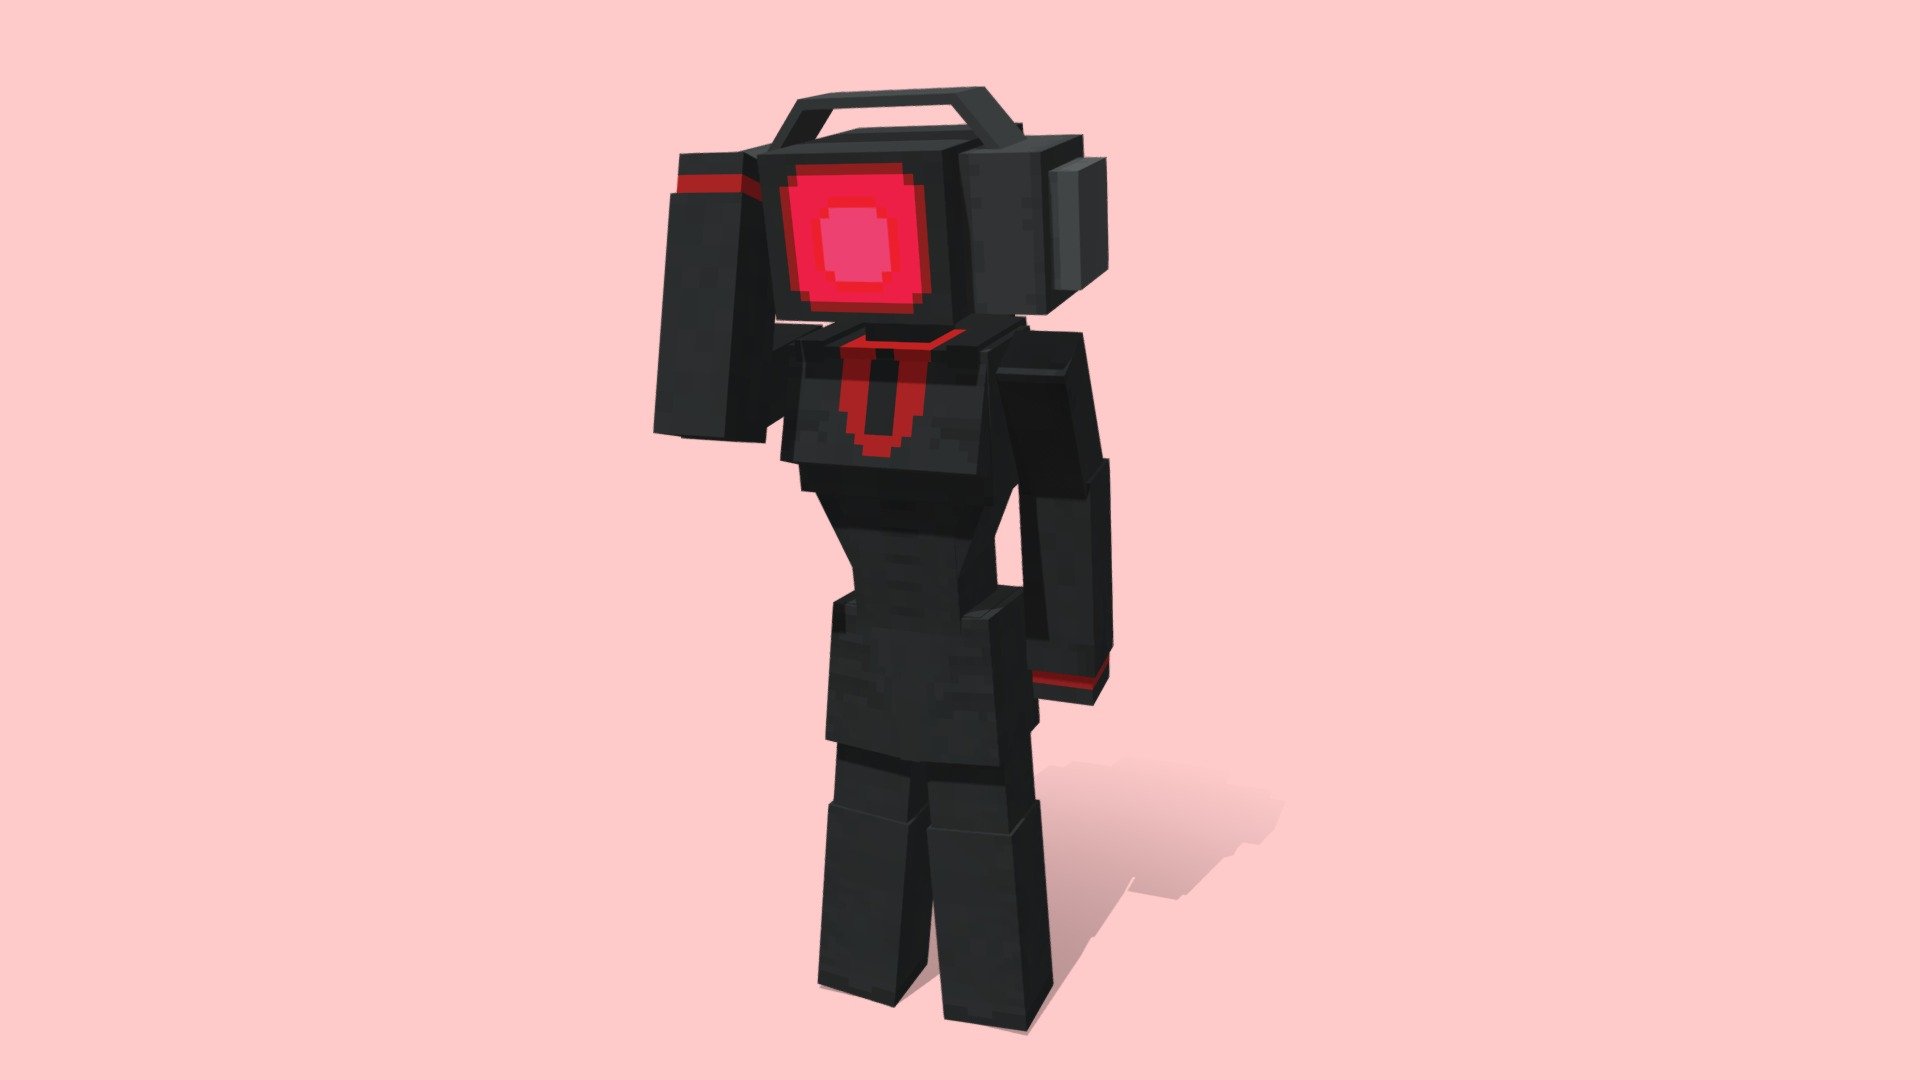 Skibidi Toilet Speaker Woman - Minecraft

Include the Blockbench project, textures and T-pose default for easy implementation.

Would you like to receive many models each month?

Support me on my Patreon and receive models every week of all my projects for free

https://www.patreon.com/MColeccionista

Do you need more help? Write to me on Instagram and request what you need. I create mods with many models of different themes and current trends,

many more than you will see published here:

https://www.instagram.com/mcoleccionista/ - Skibidi Toilet Speaker Woman - Minecraft - Buy Royalty Free 3D model by El Coleccionista (@Coleccionista) 3d model